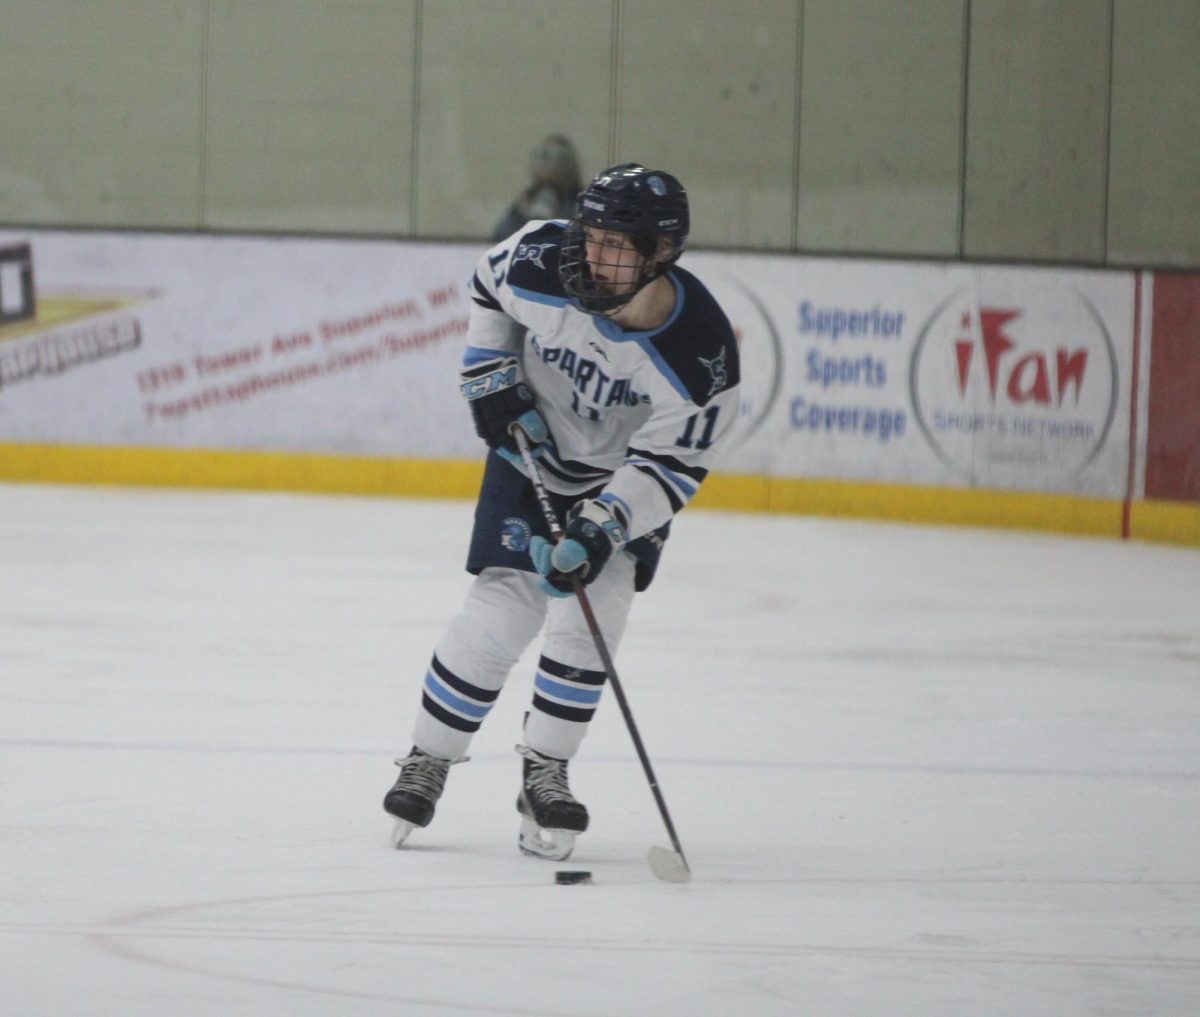 Sophomore forward Brady Haroldson skates down the ice for a chance to extend the lead against the Ashland Oredockers. Haroldson scored two goals in the game: one in the first period to tie the game up and one in the third period. 
